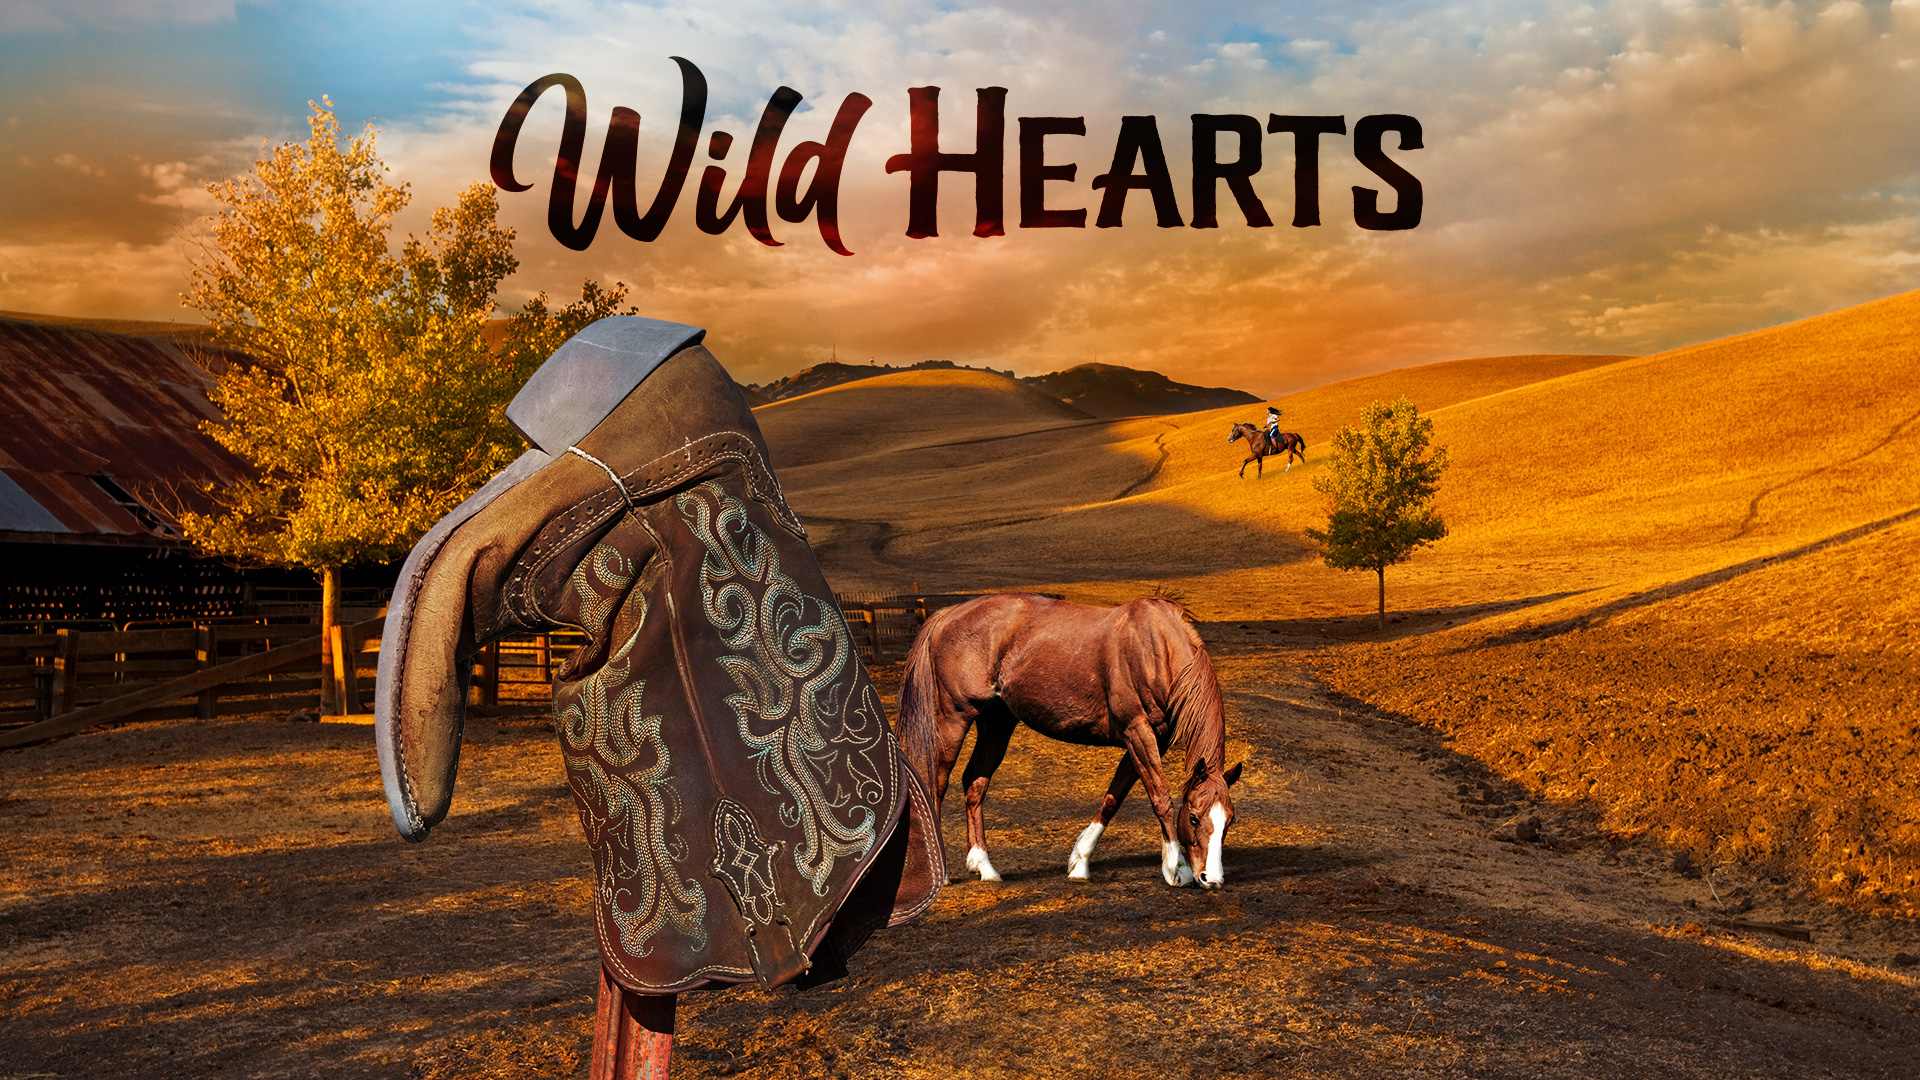 is wild hearts on game pass